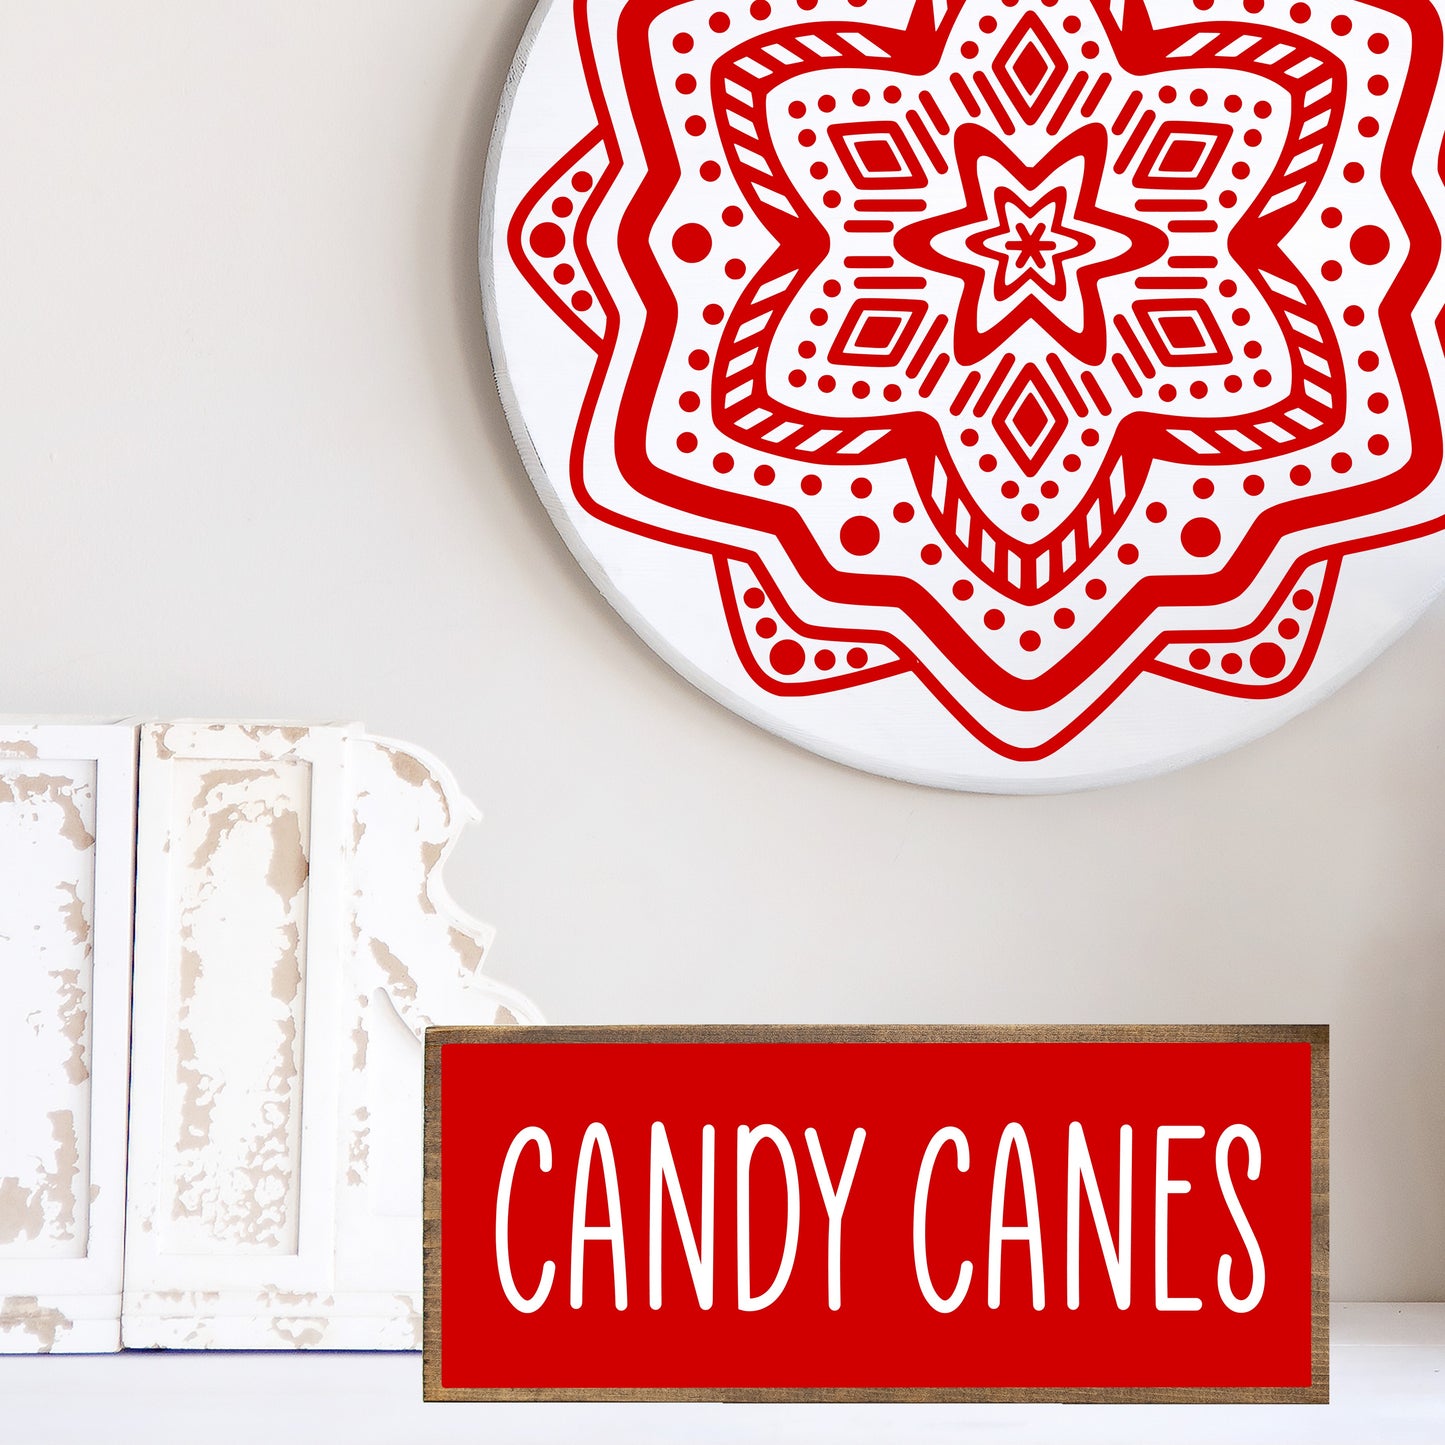 Candy Canes Shelf Sitter